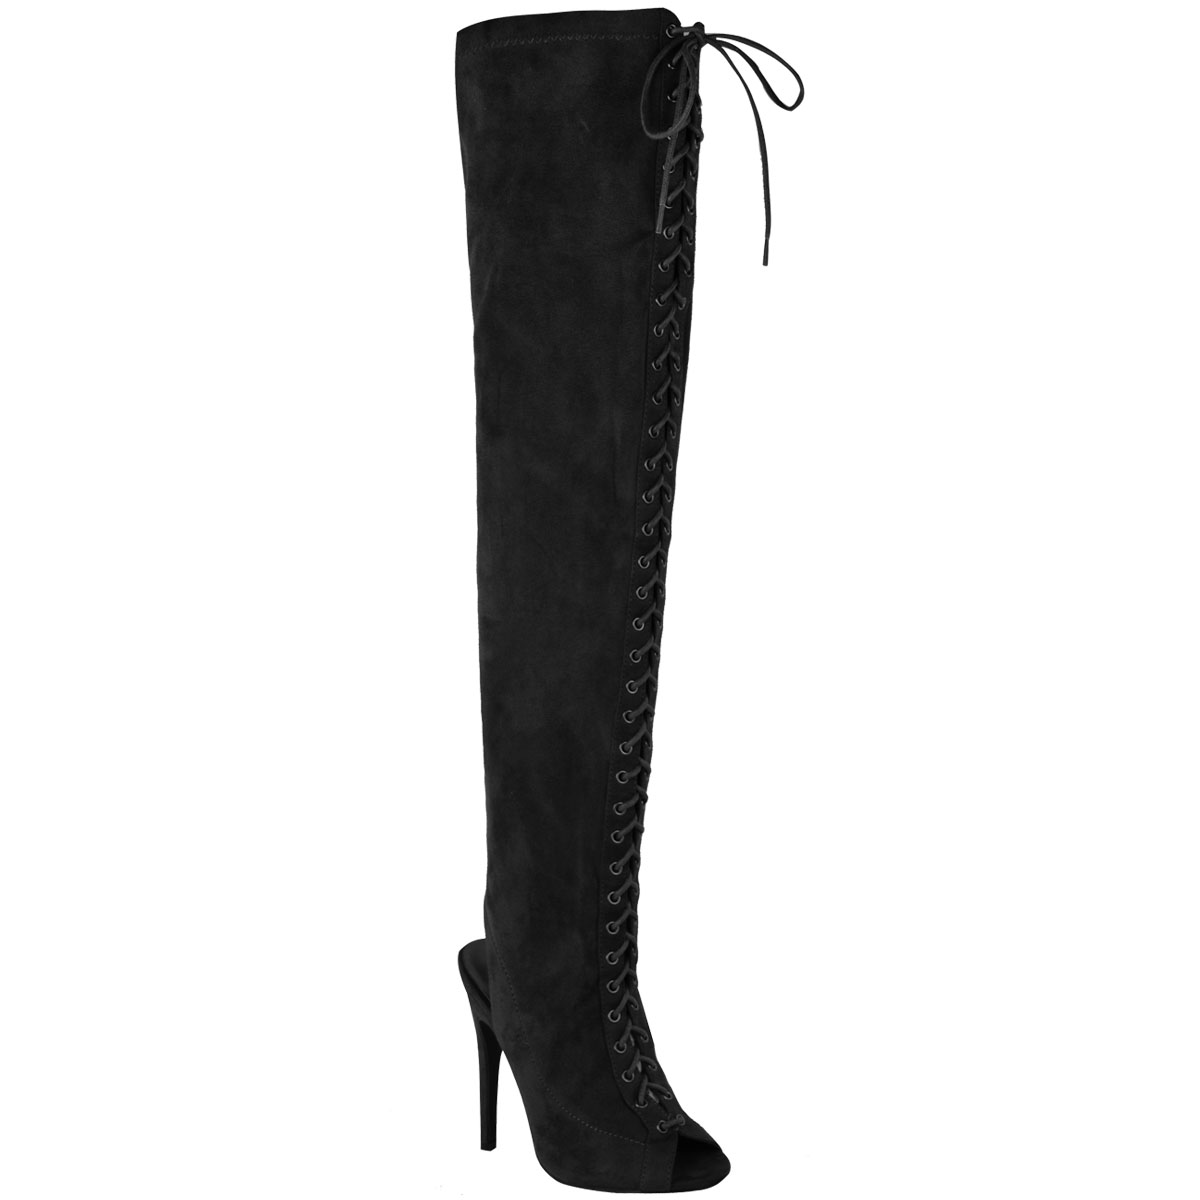 WOMENS LADIES SEXY OVER THE KNEE THIGH HIGH LACE UP STILETTOS HEELS ...